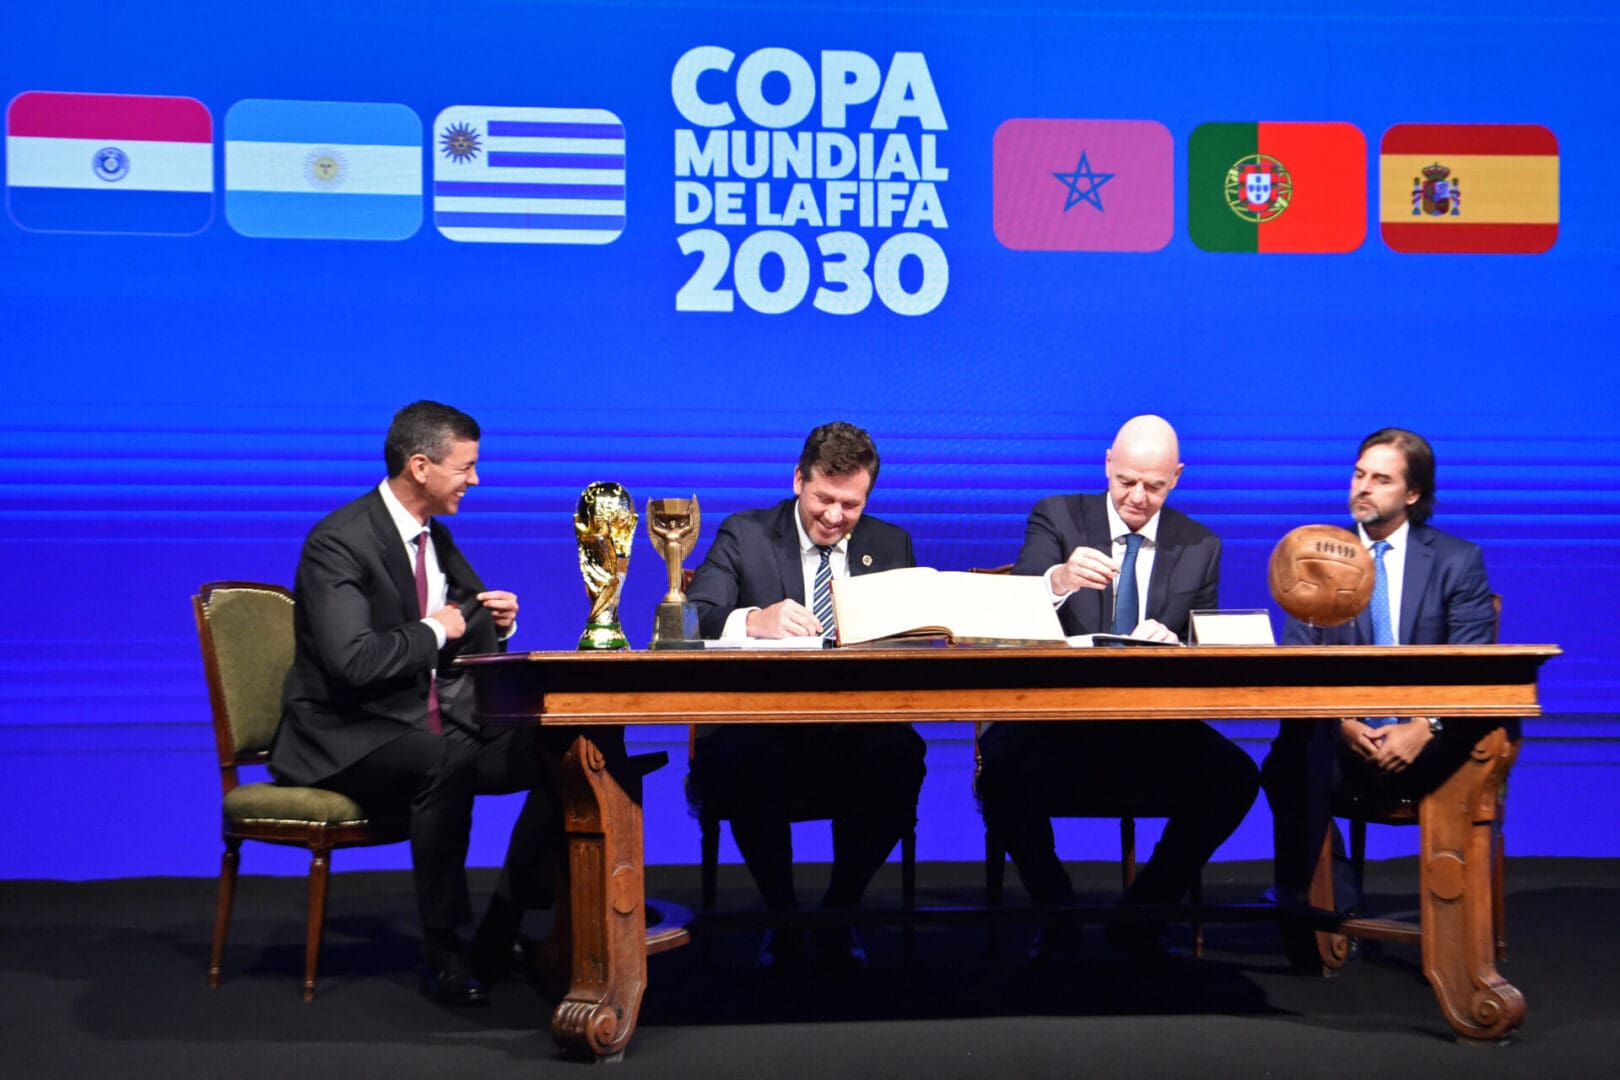 Conmebol's President Alejandro Dominguez (L-2) and FIFA President Gianni Infantino (R-2), accompanied by Paraguay's President Santiago PeÃ±a (L) and Uruguay's President Luis Lacalle(R), sign a book of minutes of the 2030 World Cup during Conmebol's 78th Ordinary Congress in Luque, Paraguay on April 11, 2024.